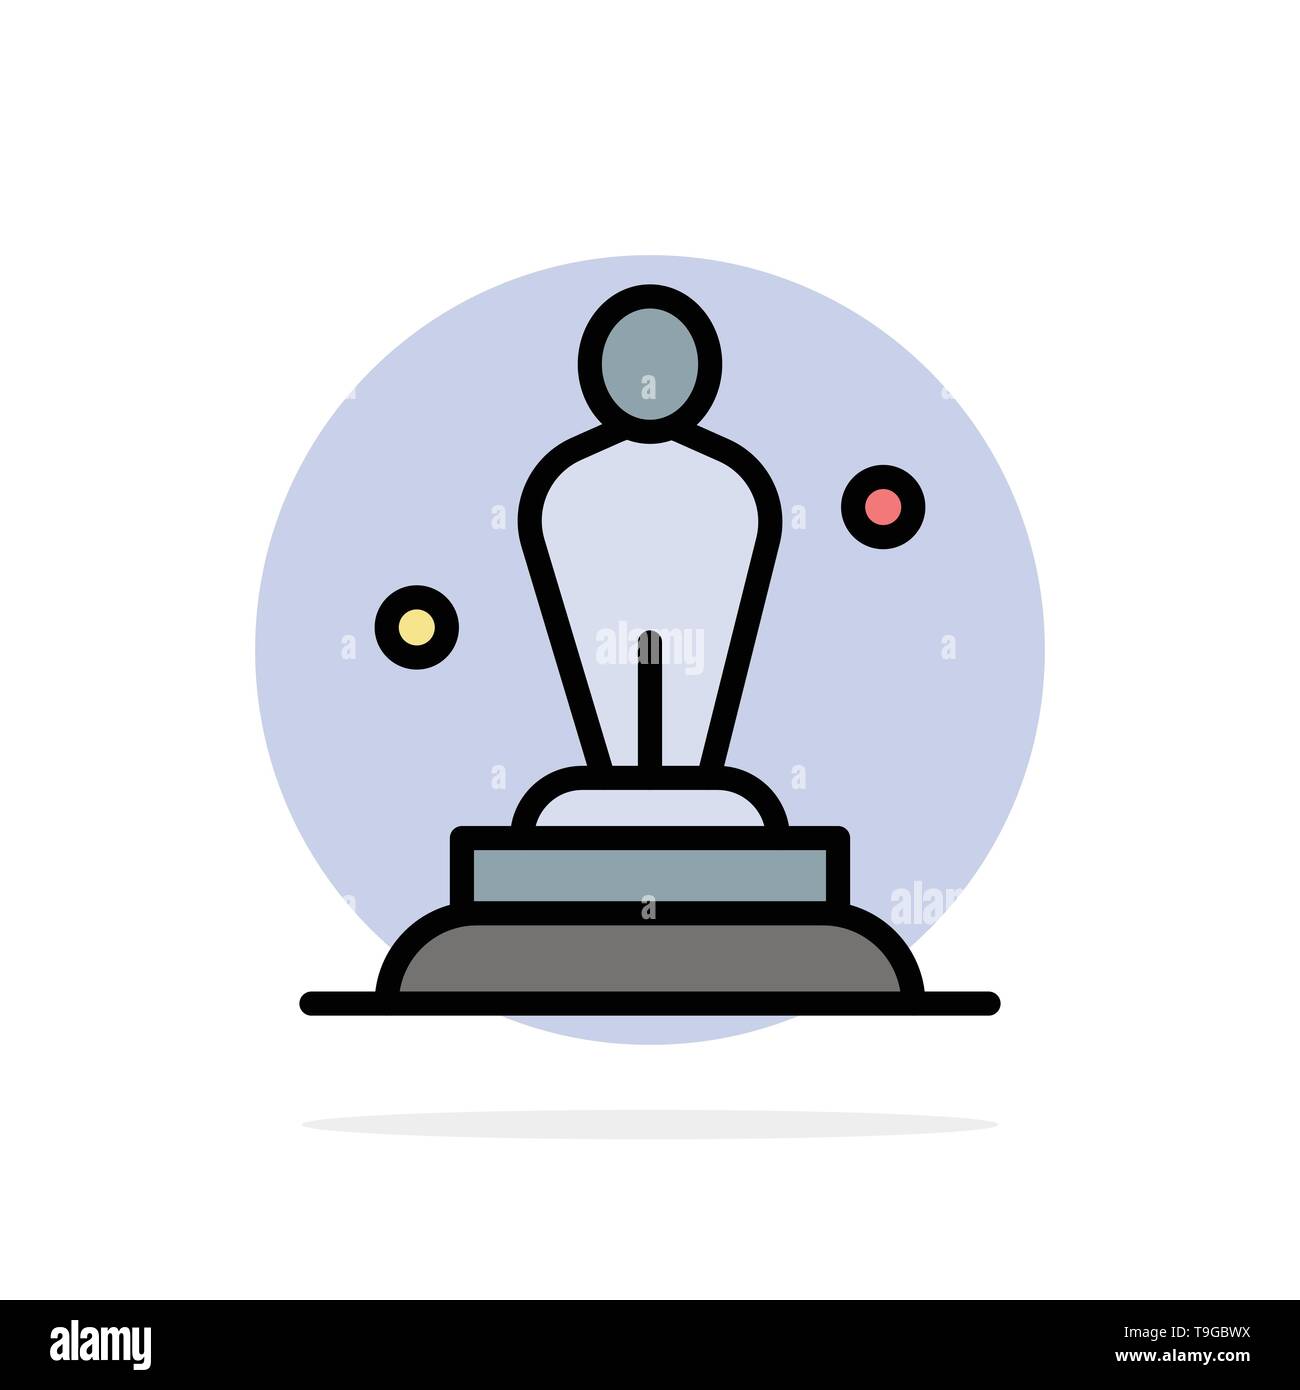 Academy, Award, Oscar, Statue, Trophy Abstract Circle Background Flat color Icon Stock Vector